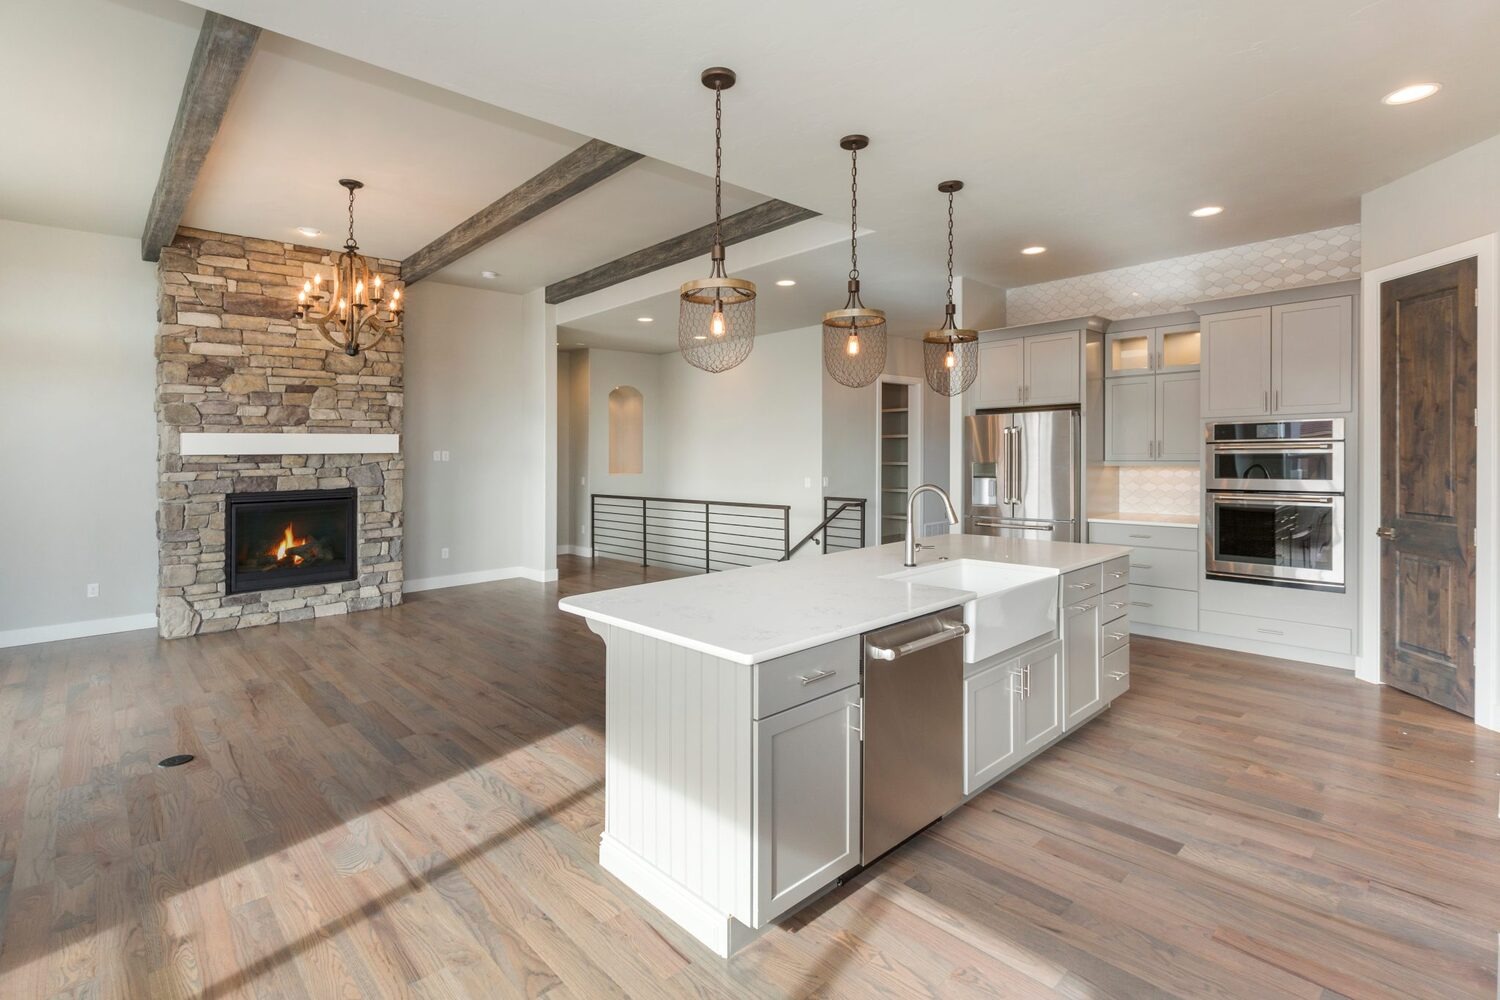 Home remodeling Buffalo Grove resulted in a modern living area with an open kitchen